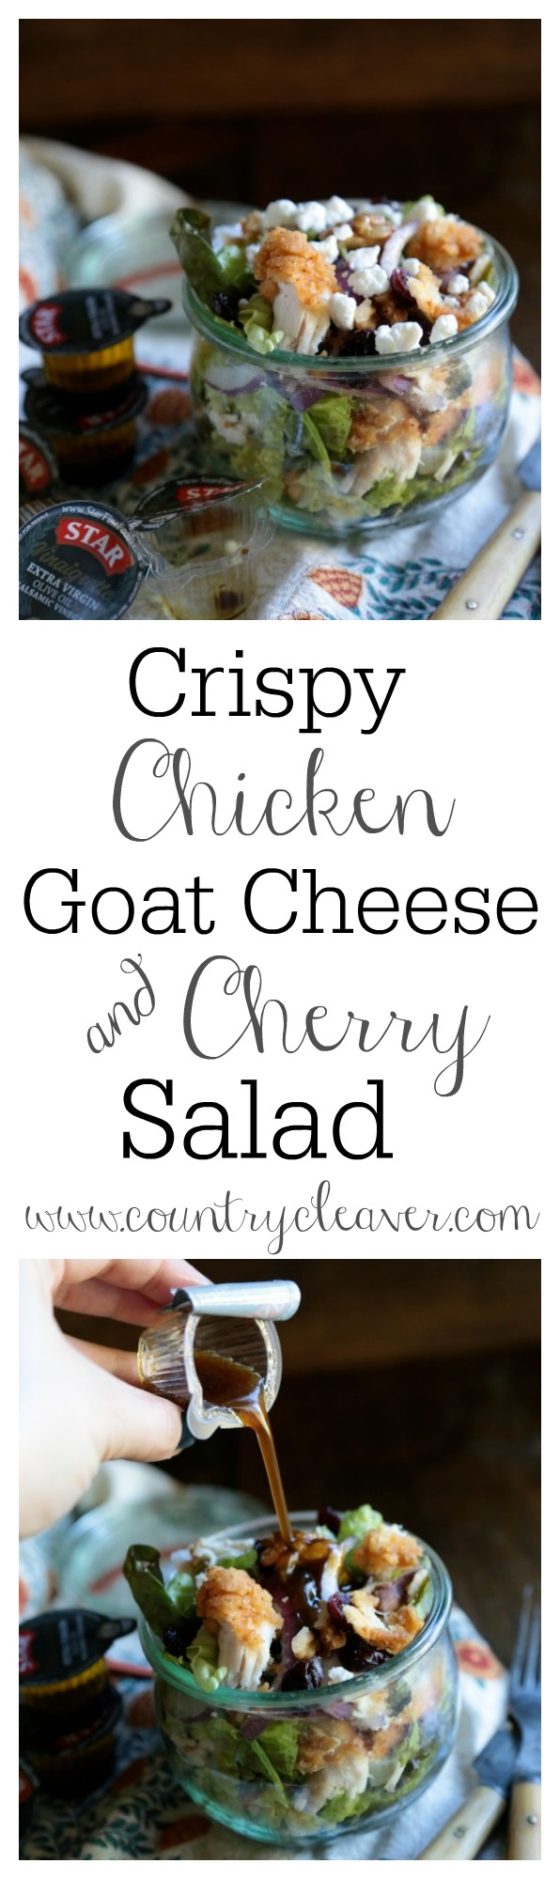 Crispy Chicken Goat Cheese and Cherry Salad- www.countrycleaver.com